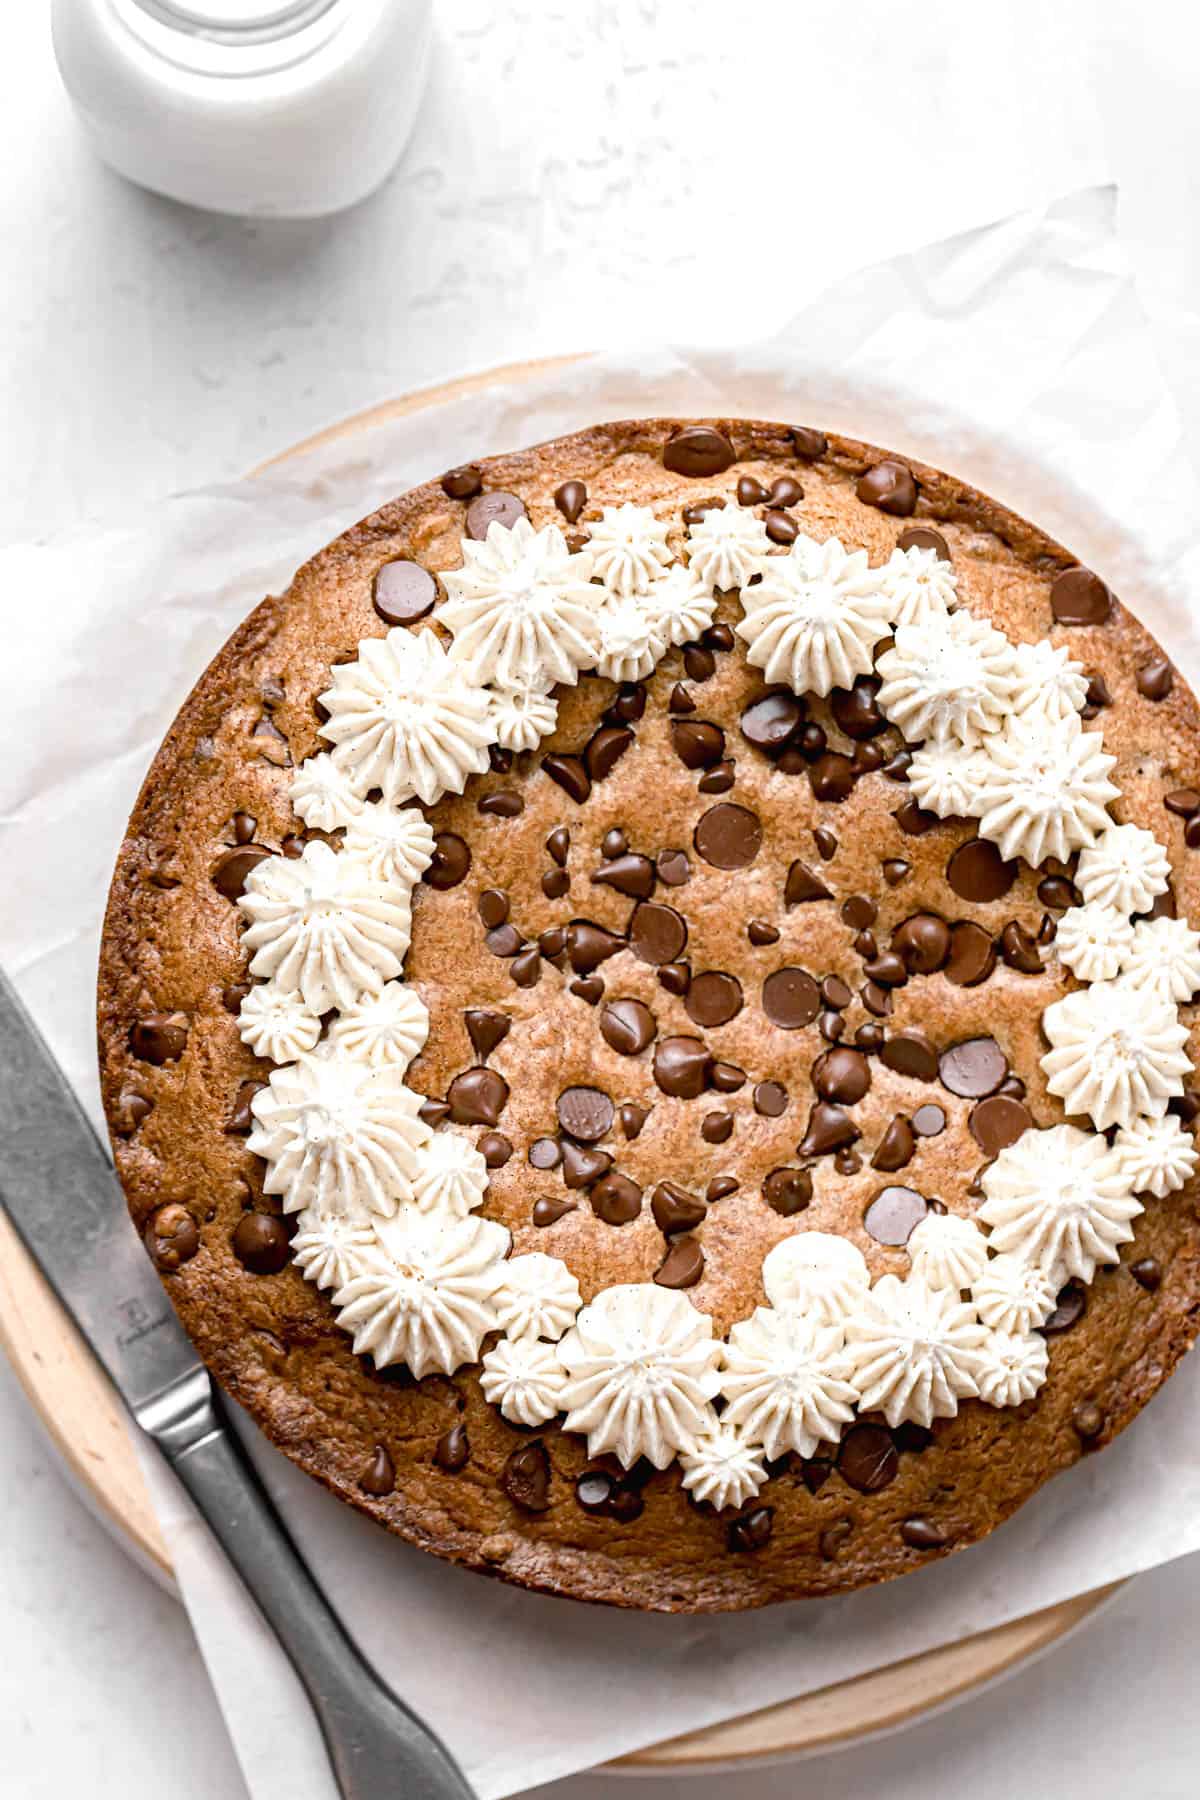 whole chocolate chip cookie cake decorated with buttercream.